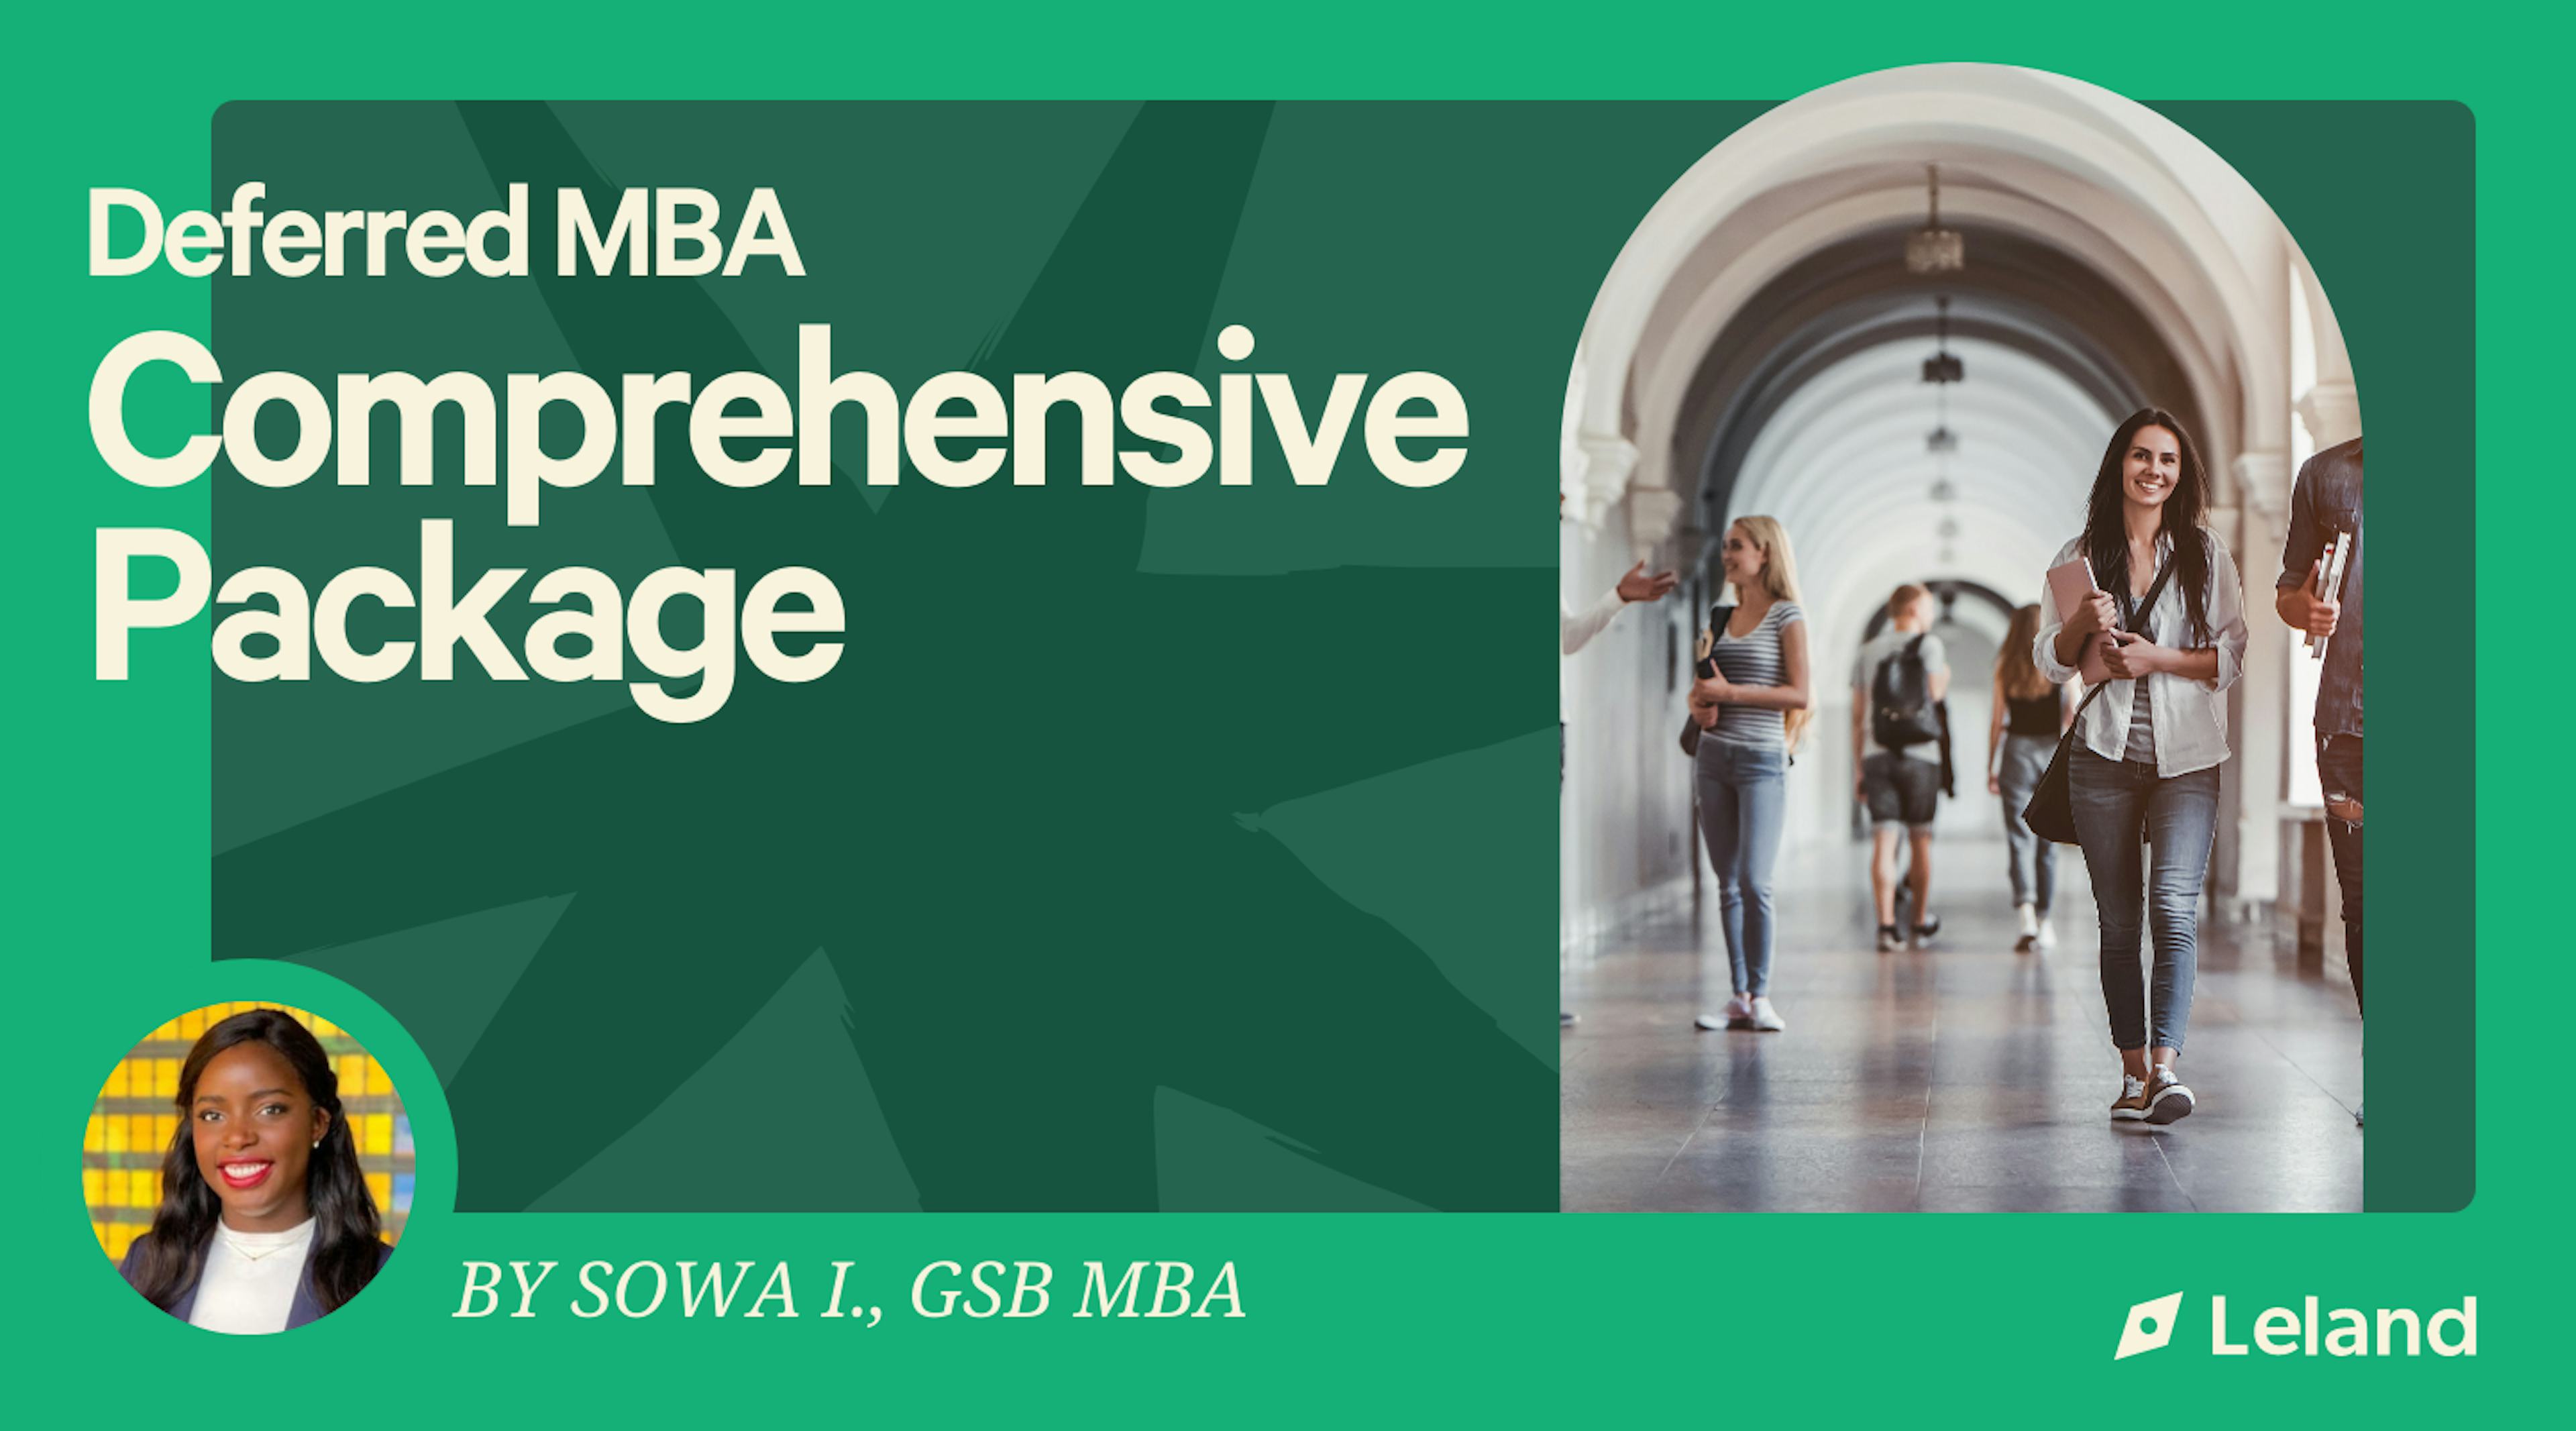 Deferred MBA Comprehensive Package